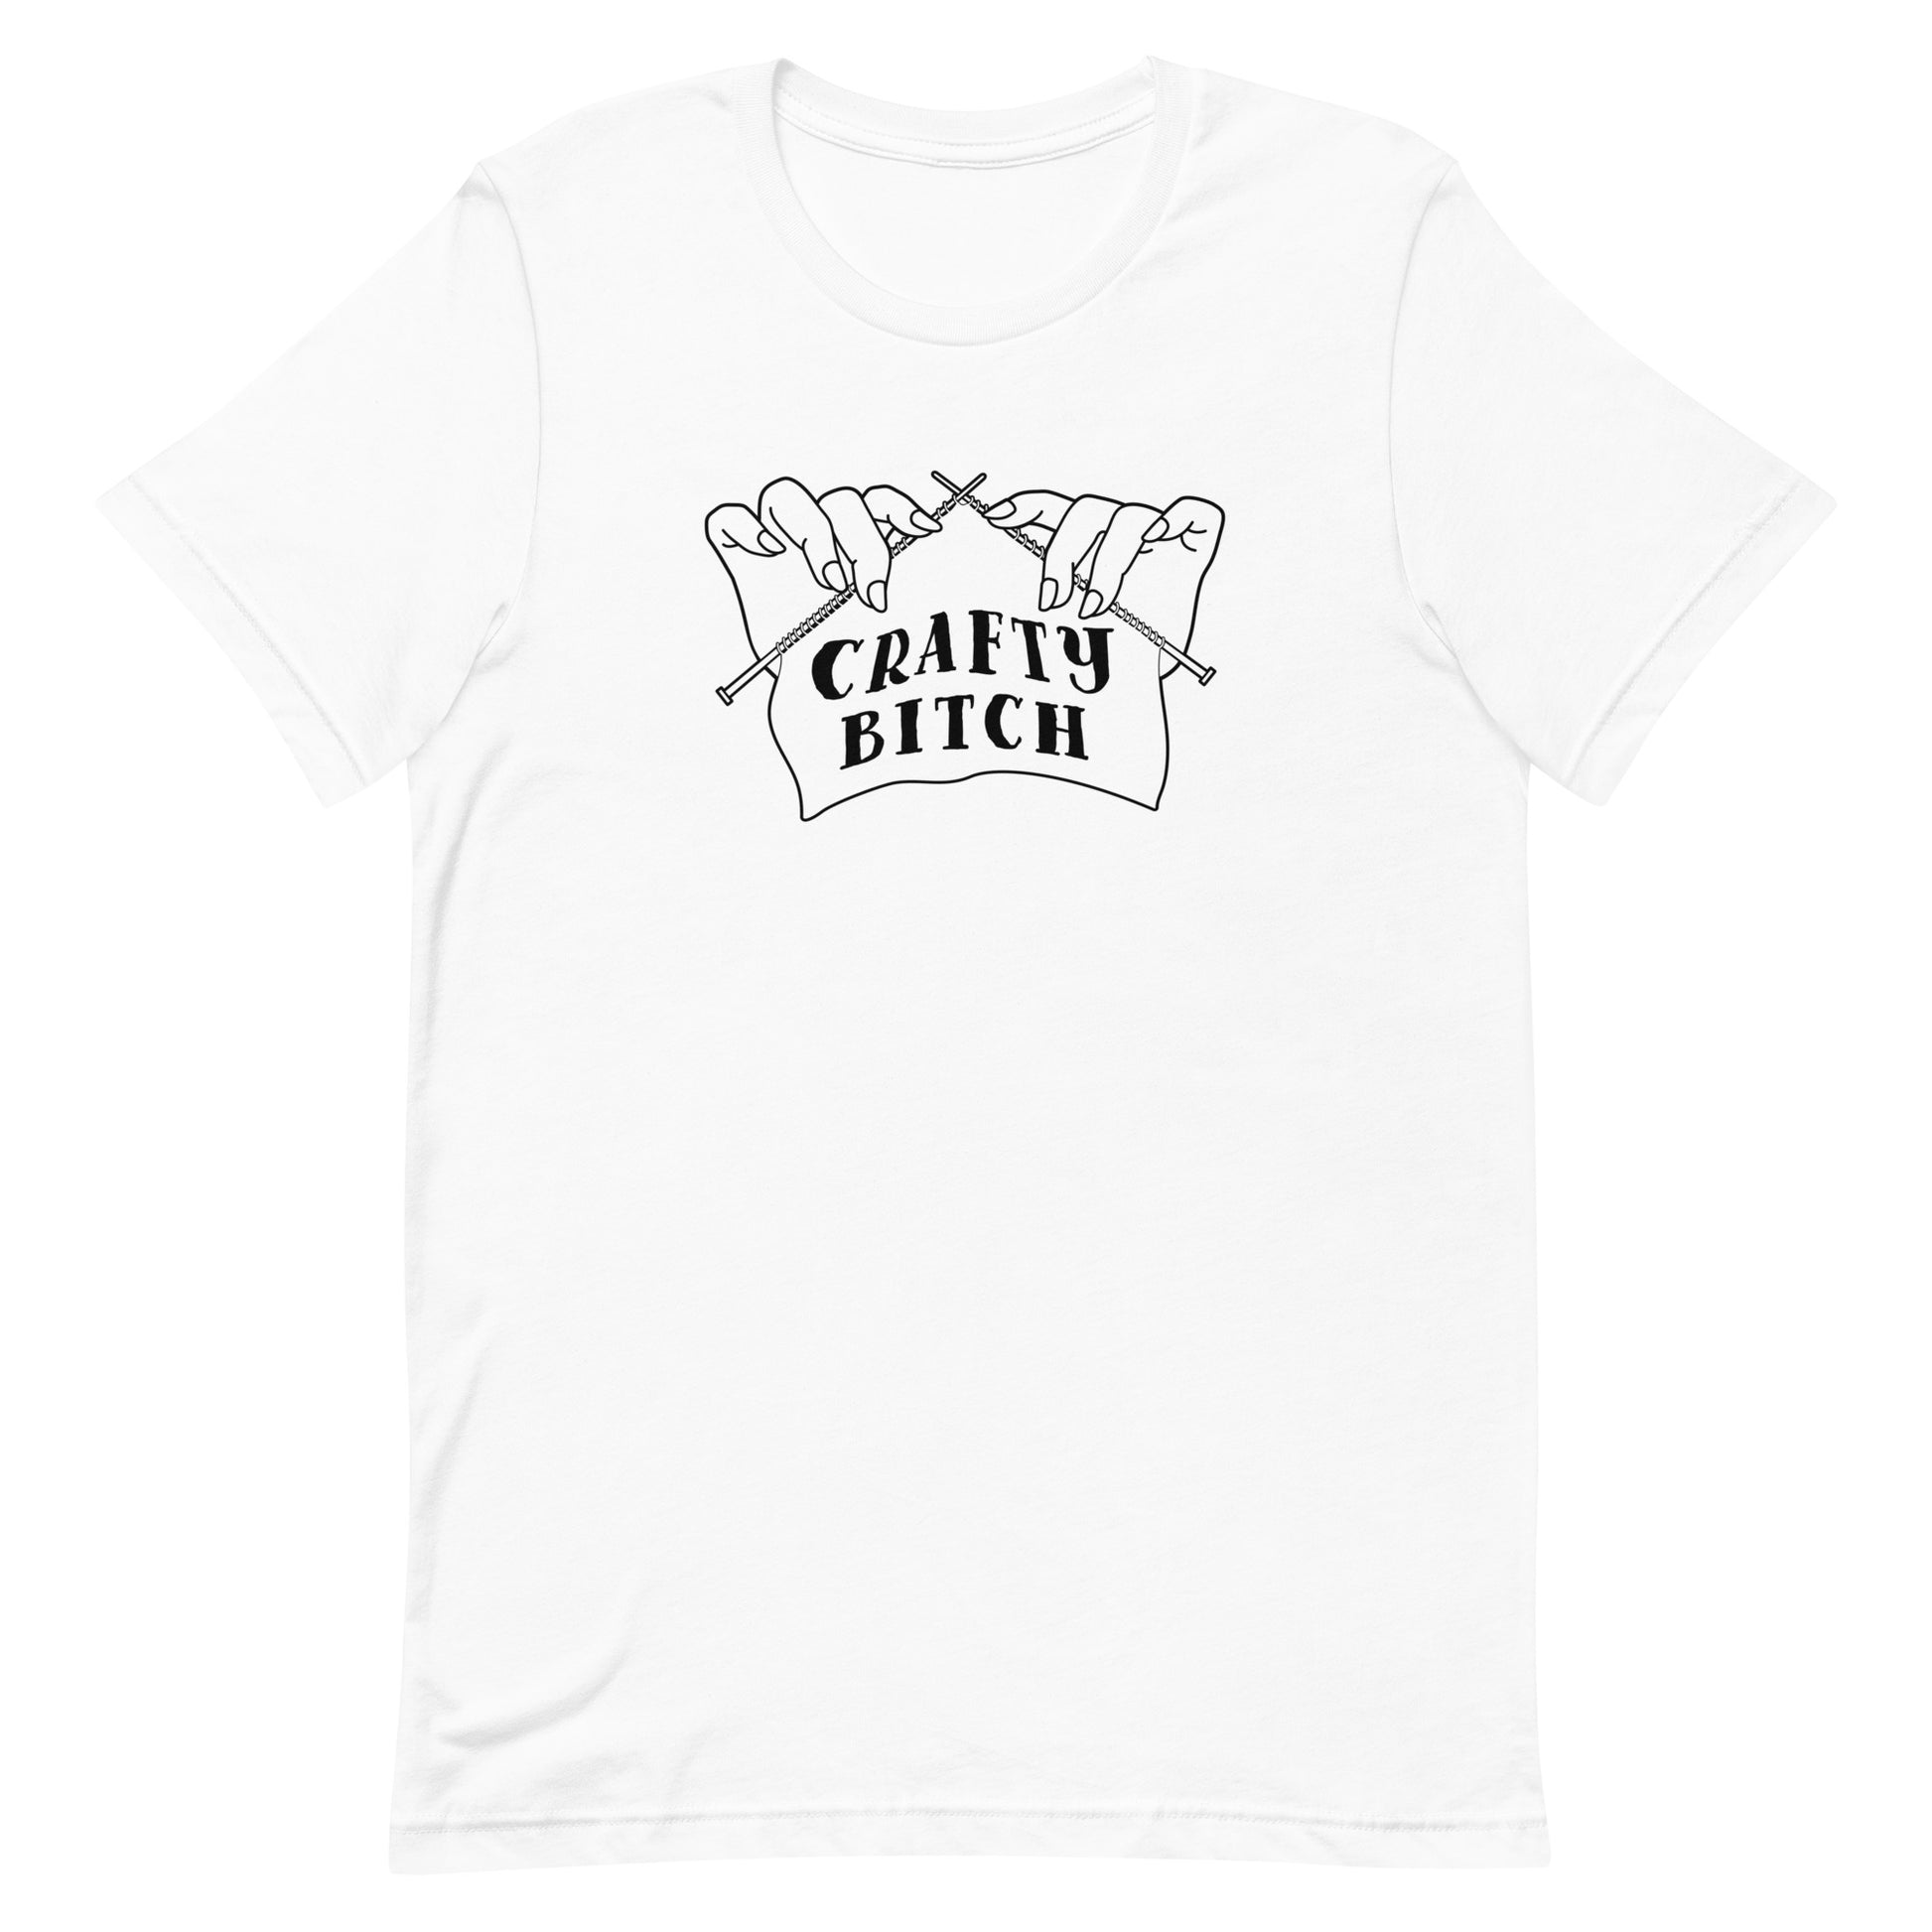 A white crewneck t-shirt featuring a single-color illustration of a pair of hands holding knitting needles. Fabric on the needles features text that reads "crafty bitch".